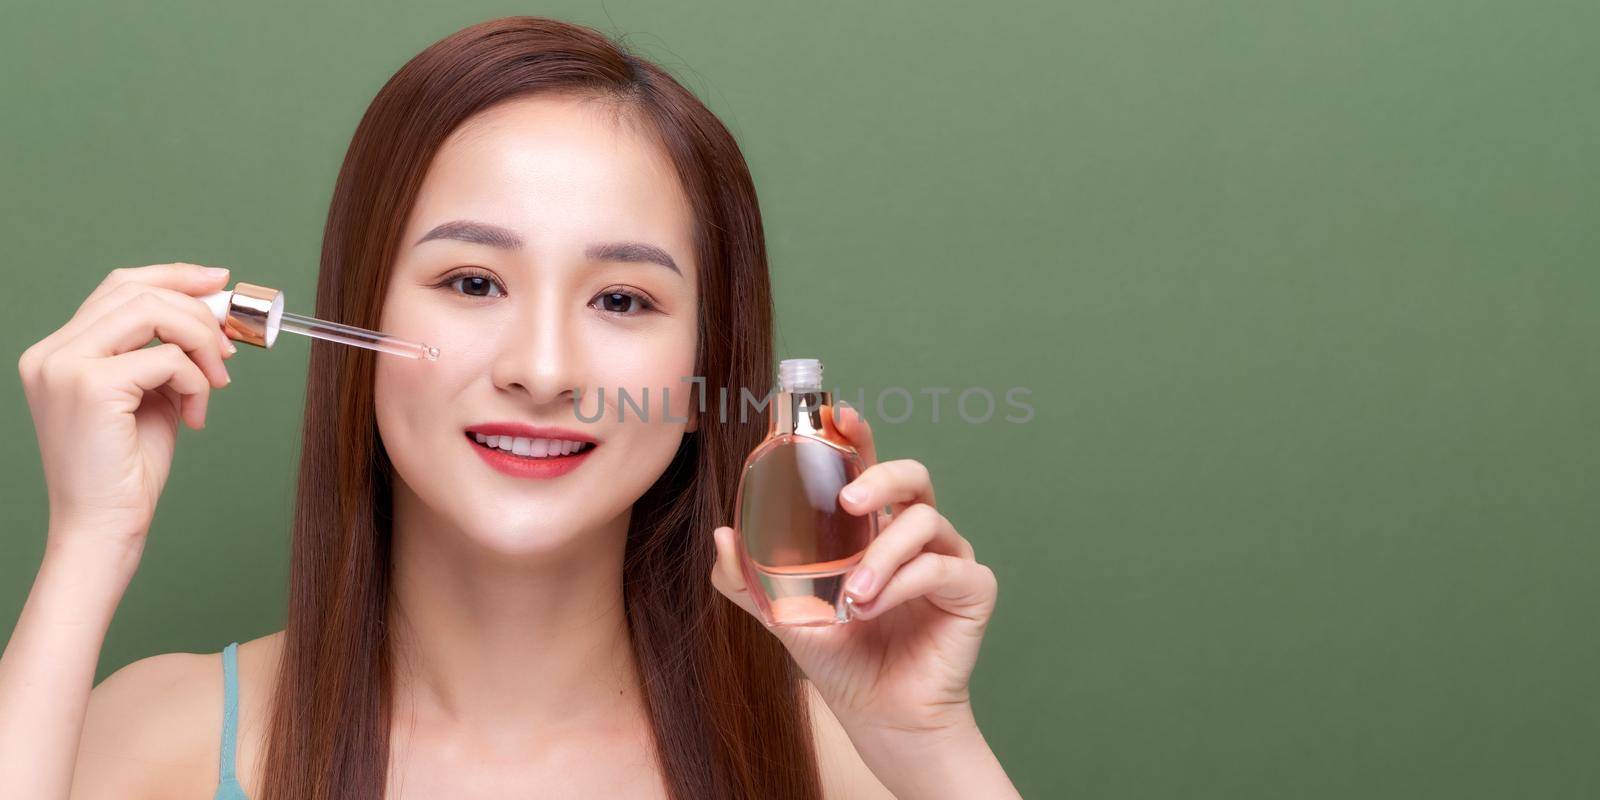 Smiling woman holding vitamin c serum near her face on green background by makidotvn